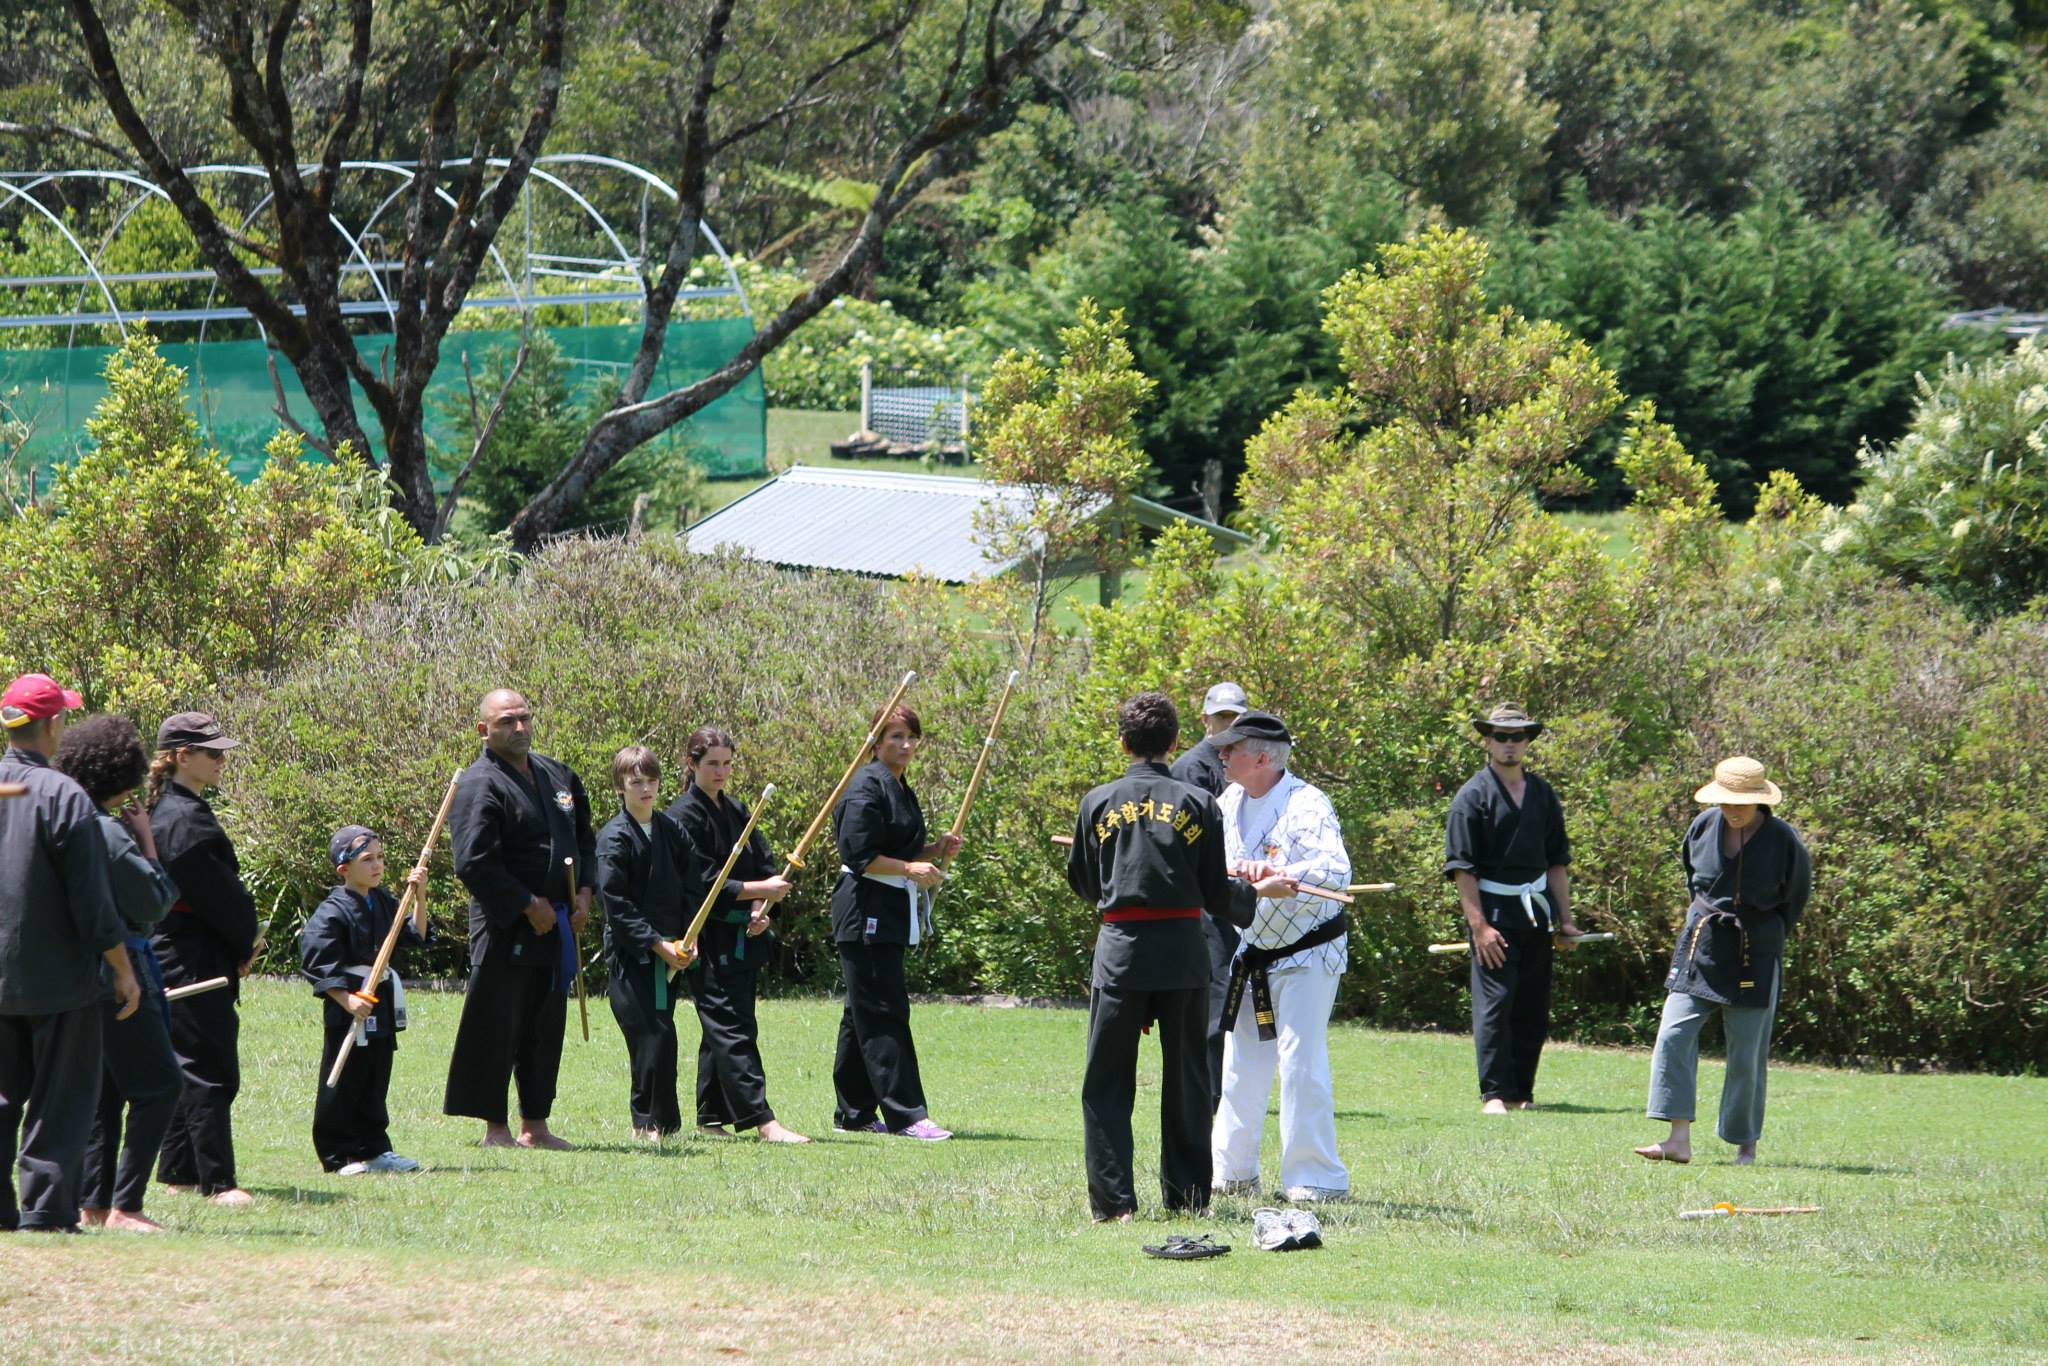 Hapkido group training on sports field